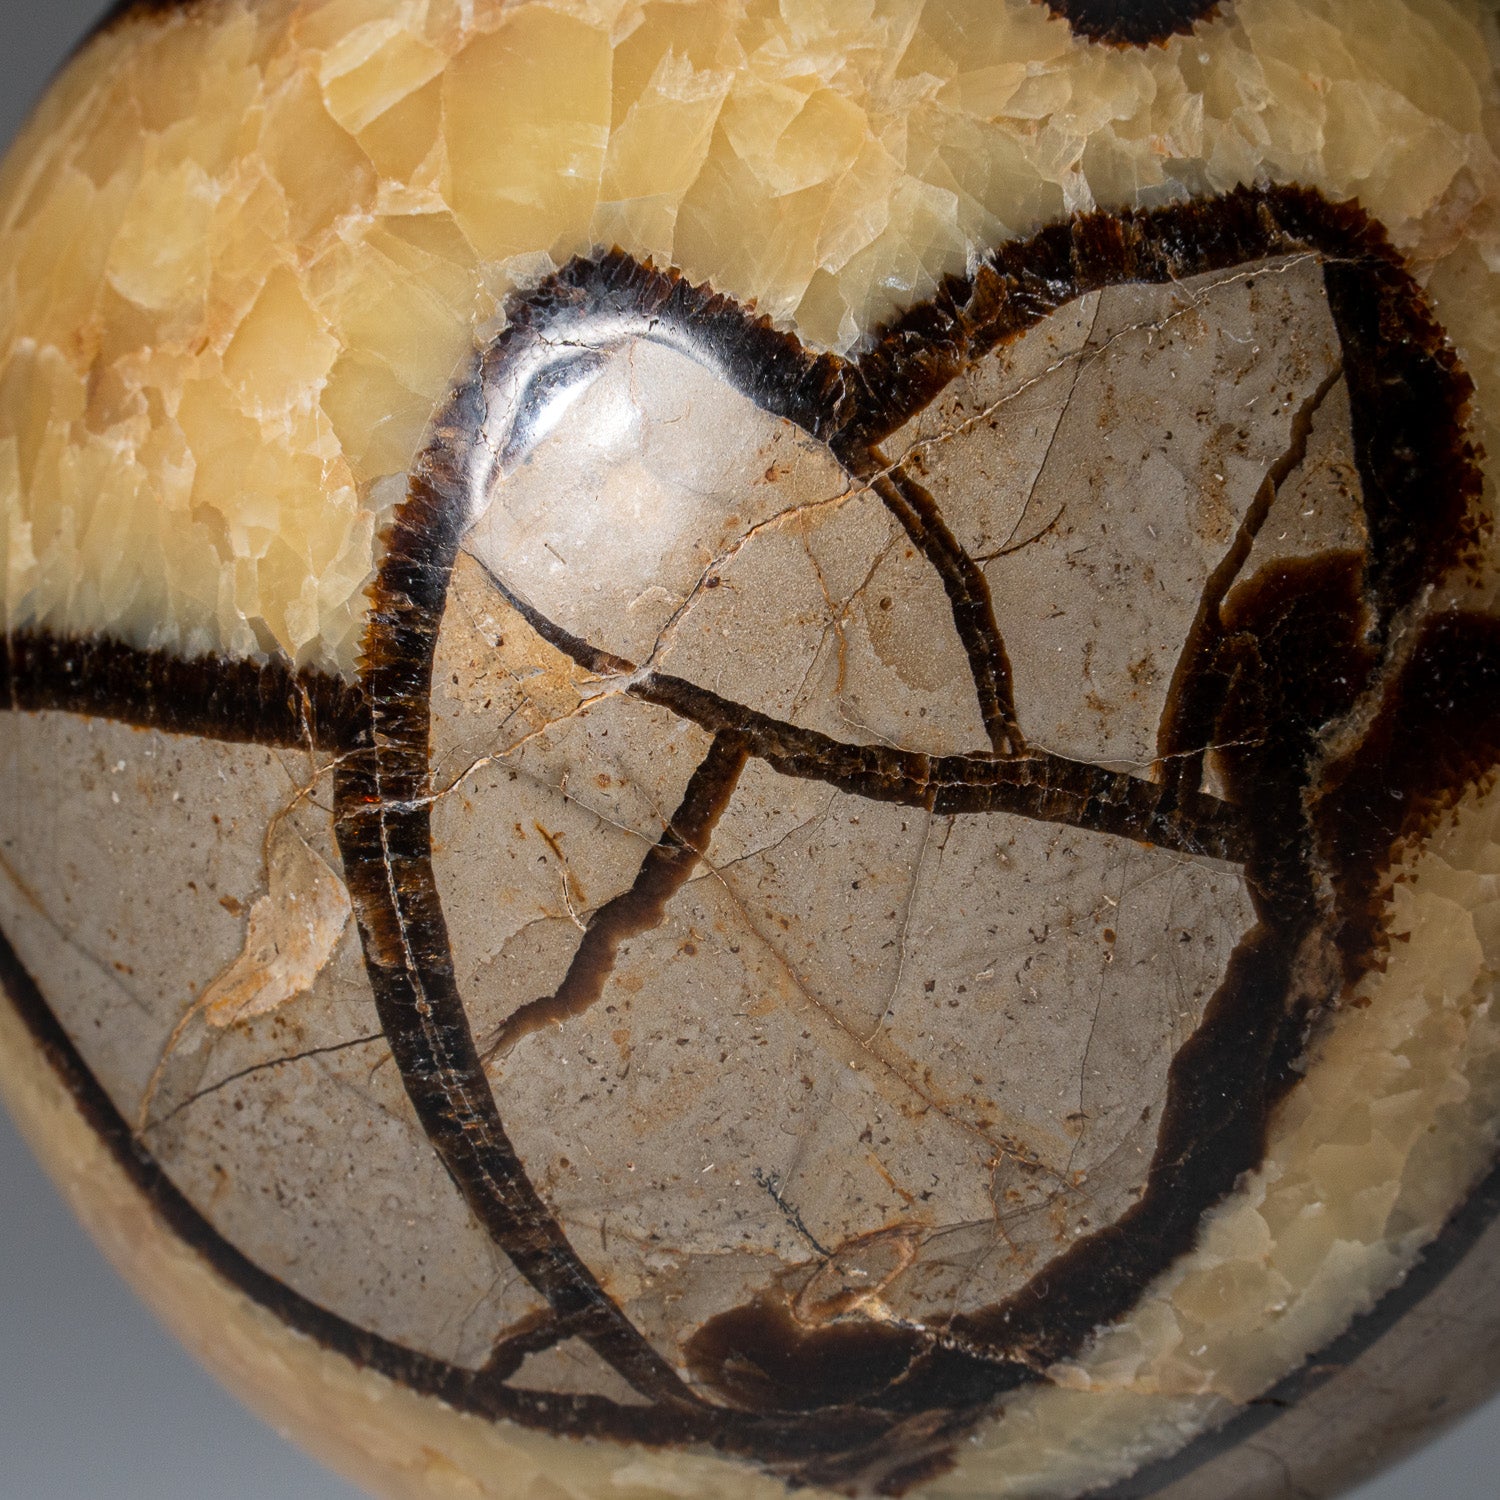 Genuine Polished Septarian Sphere from Madagascar (2.8 lbs)